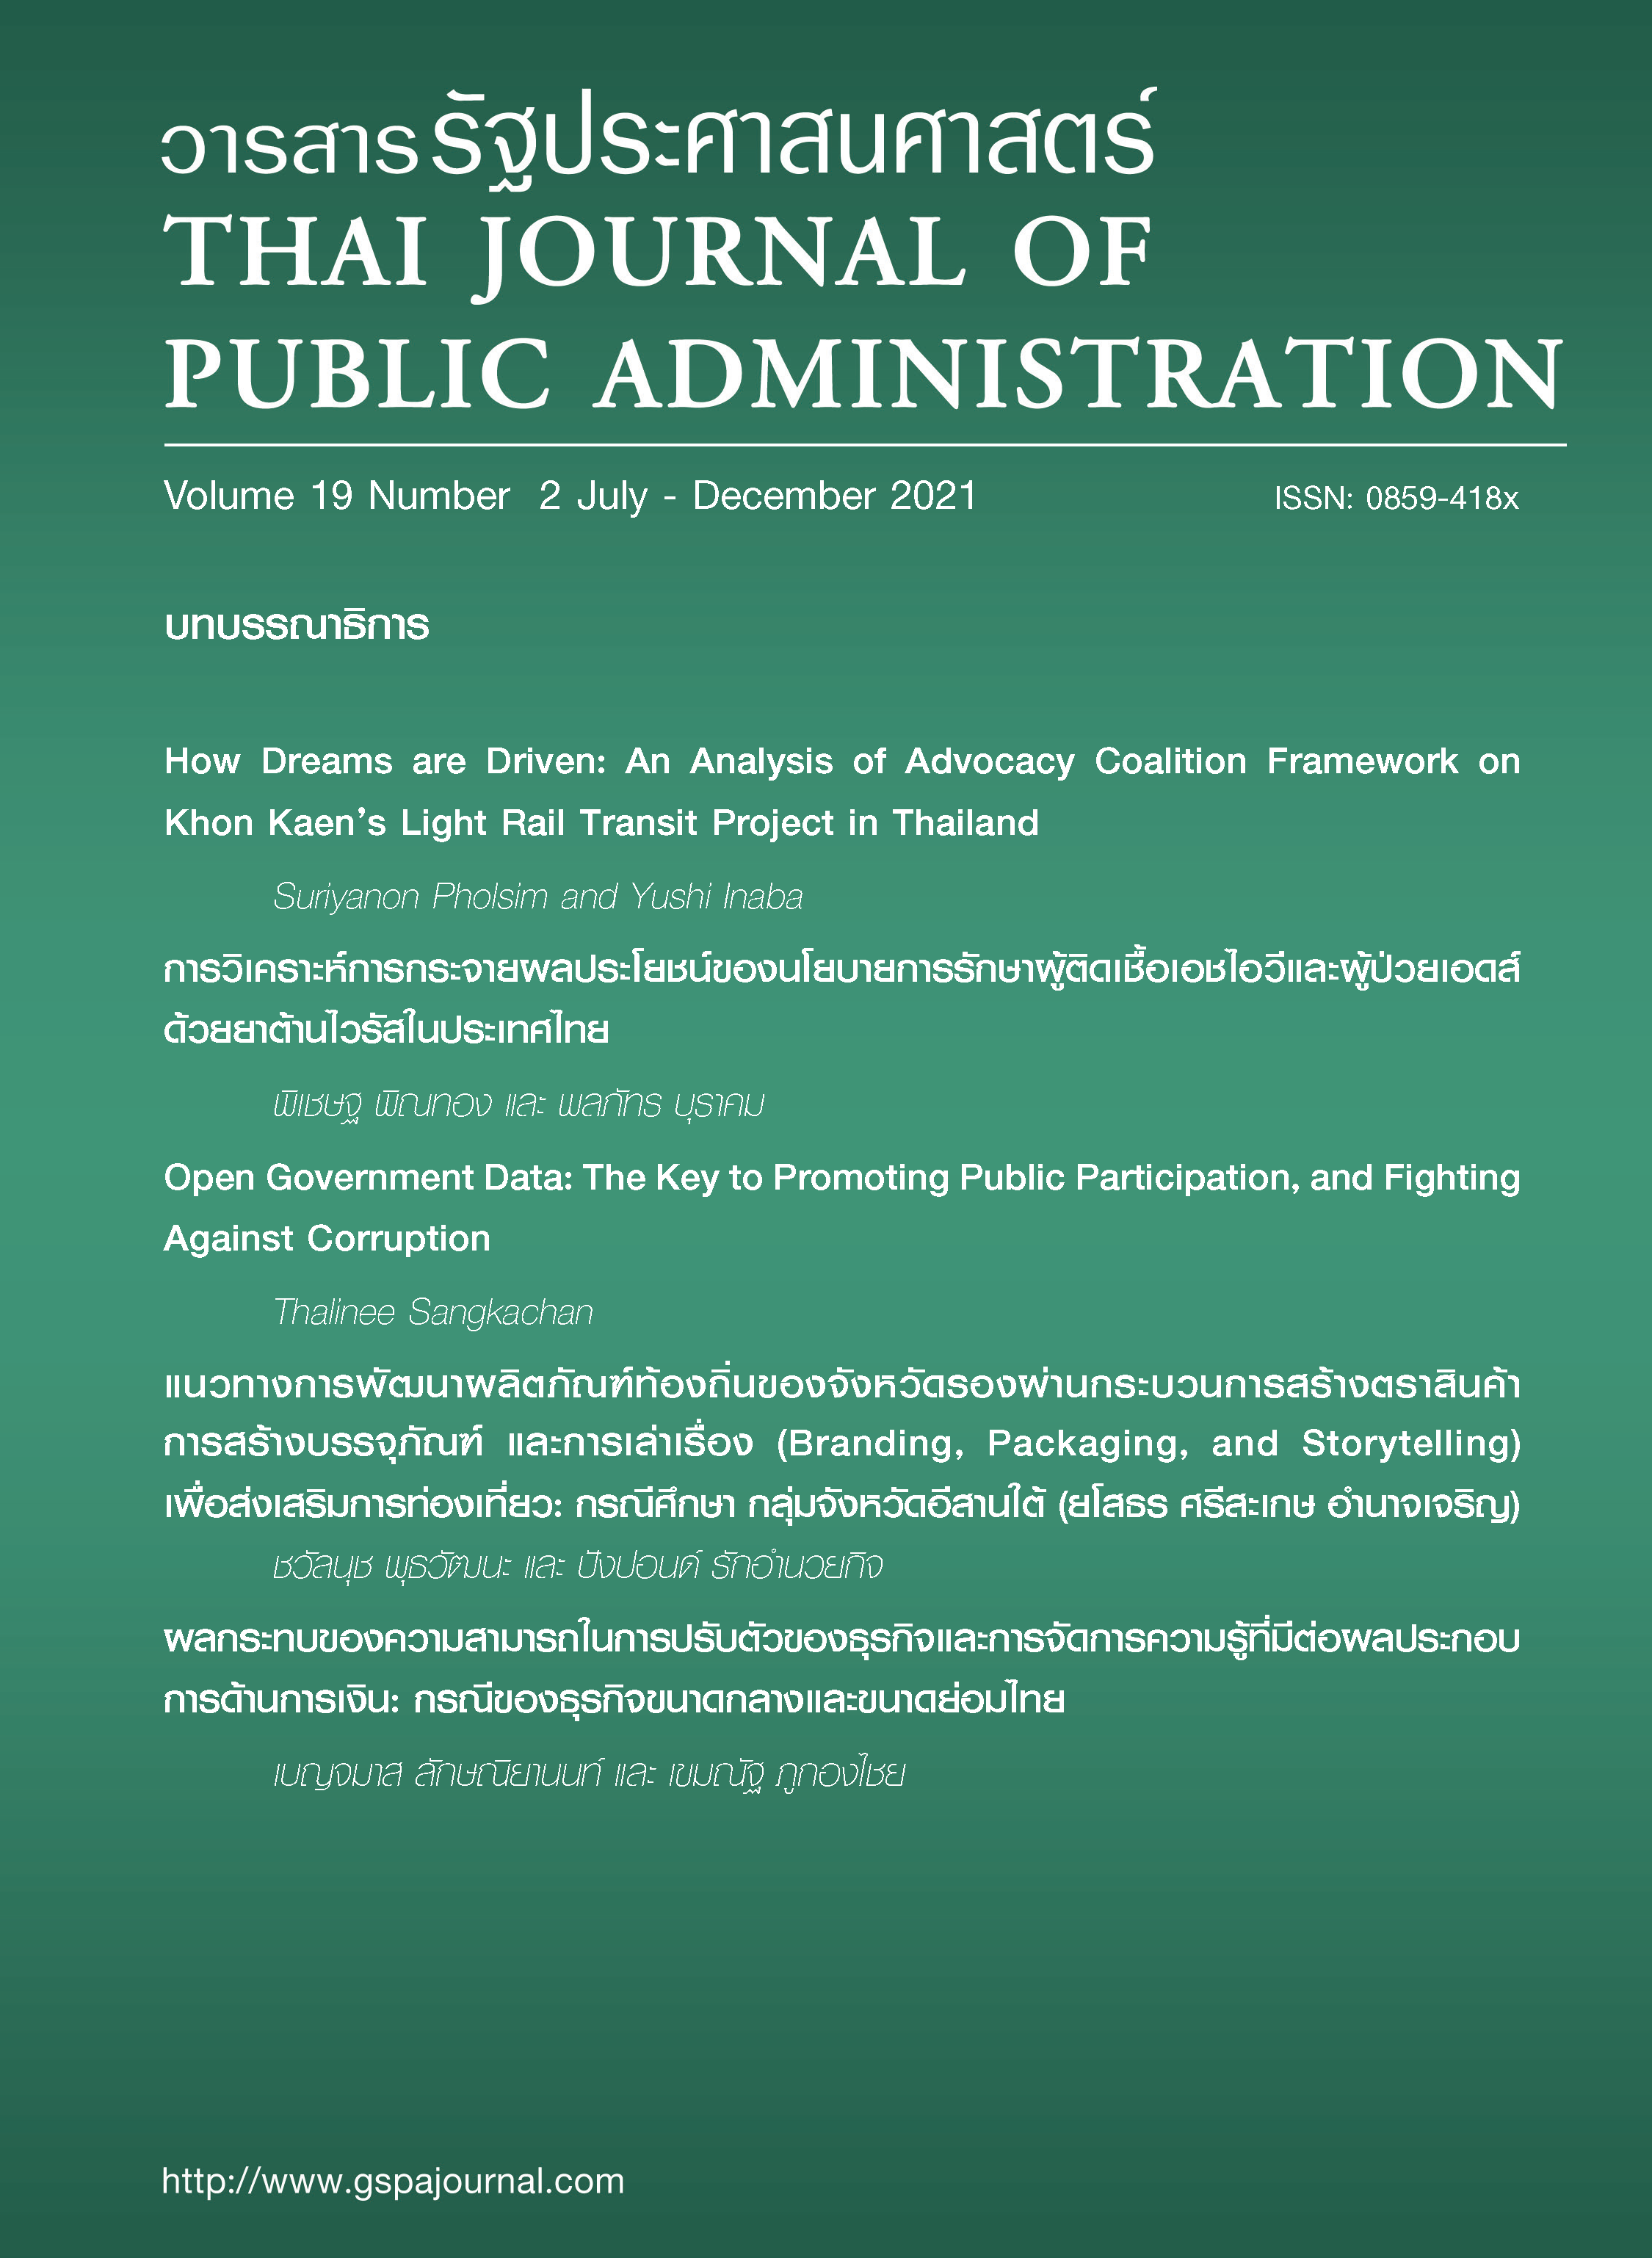 					View Vol. 19 No. 2 (2021): Thai Journal of Public Administration Volume 19 Number 2
				